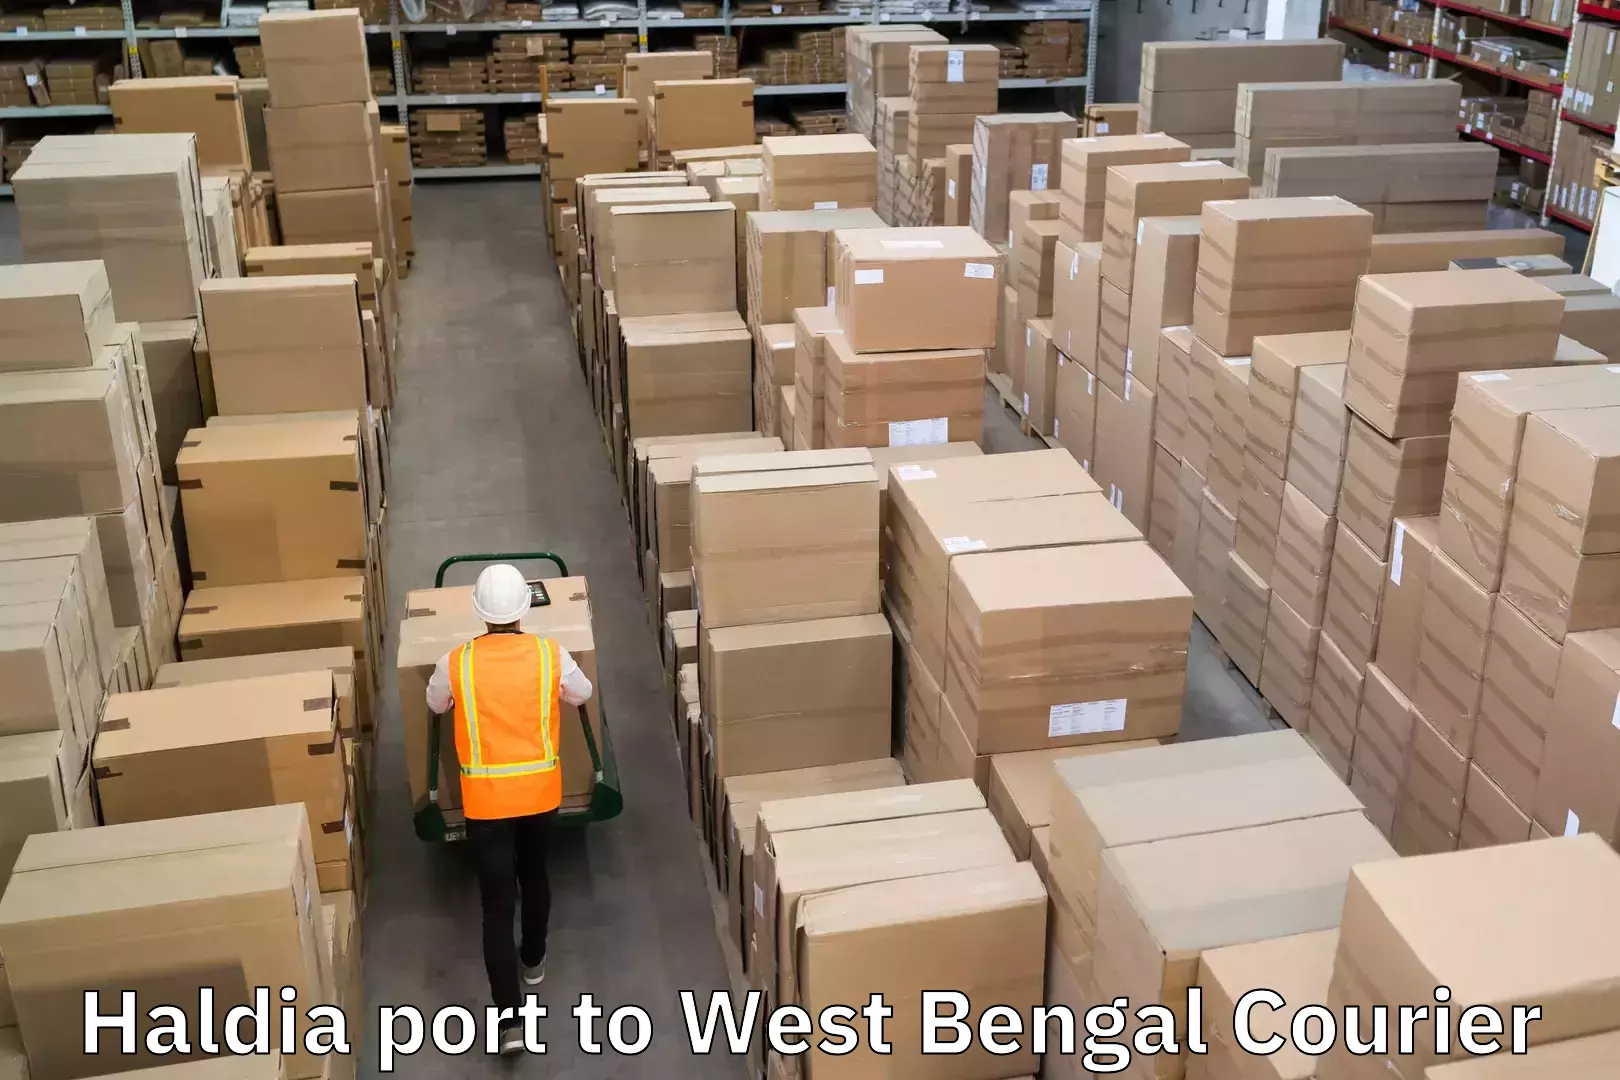 Tailored delivery services in Haldia port to Diamond Harbour